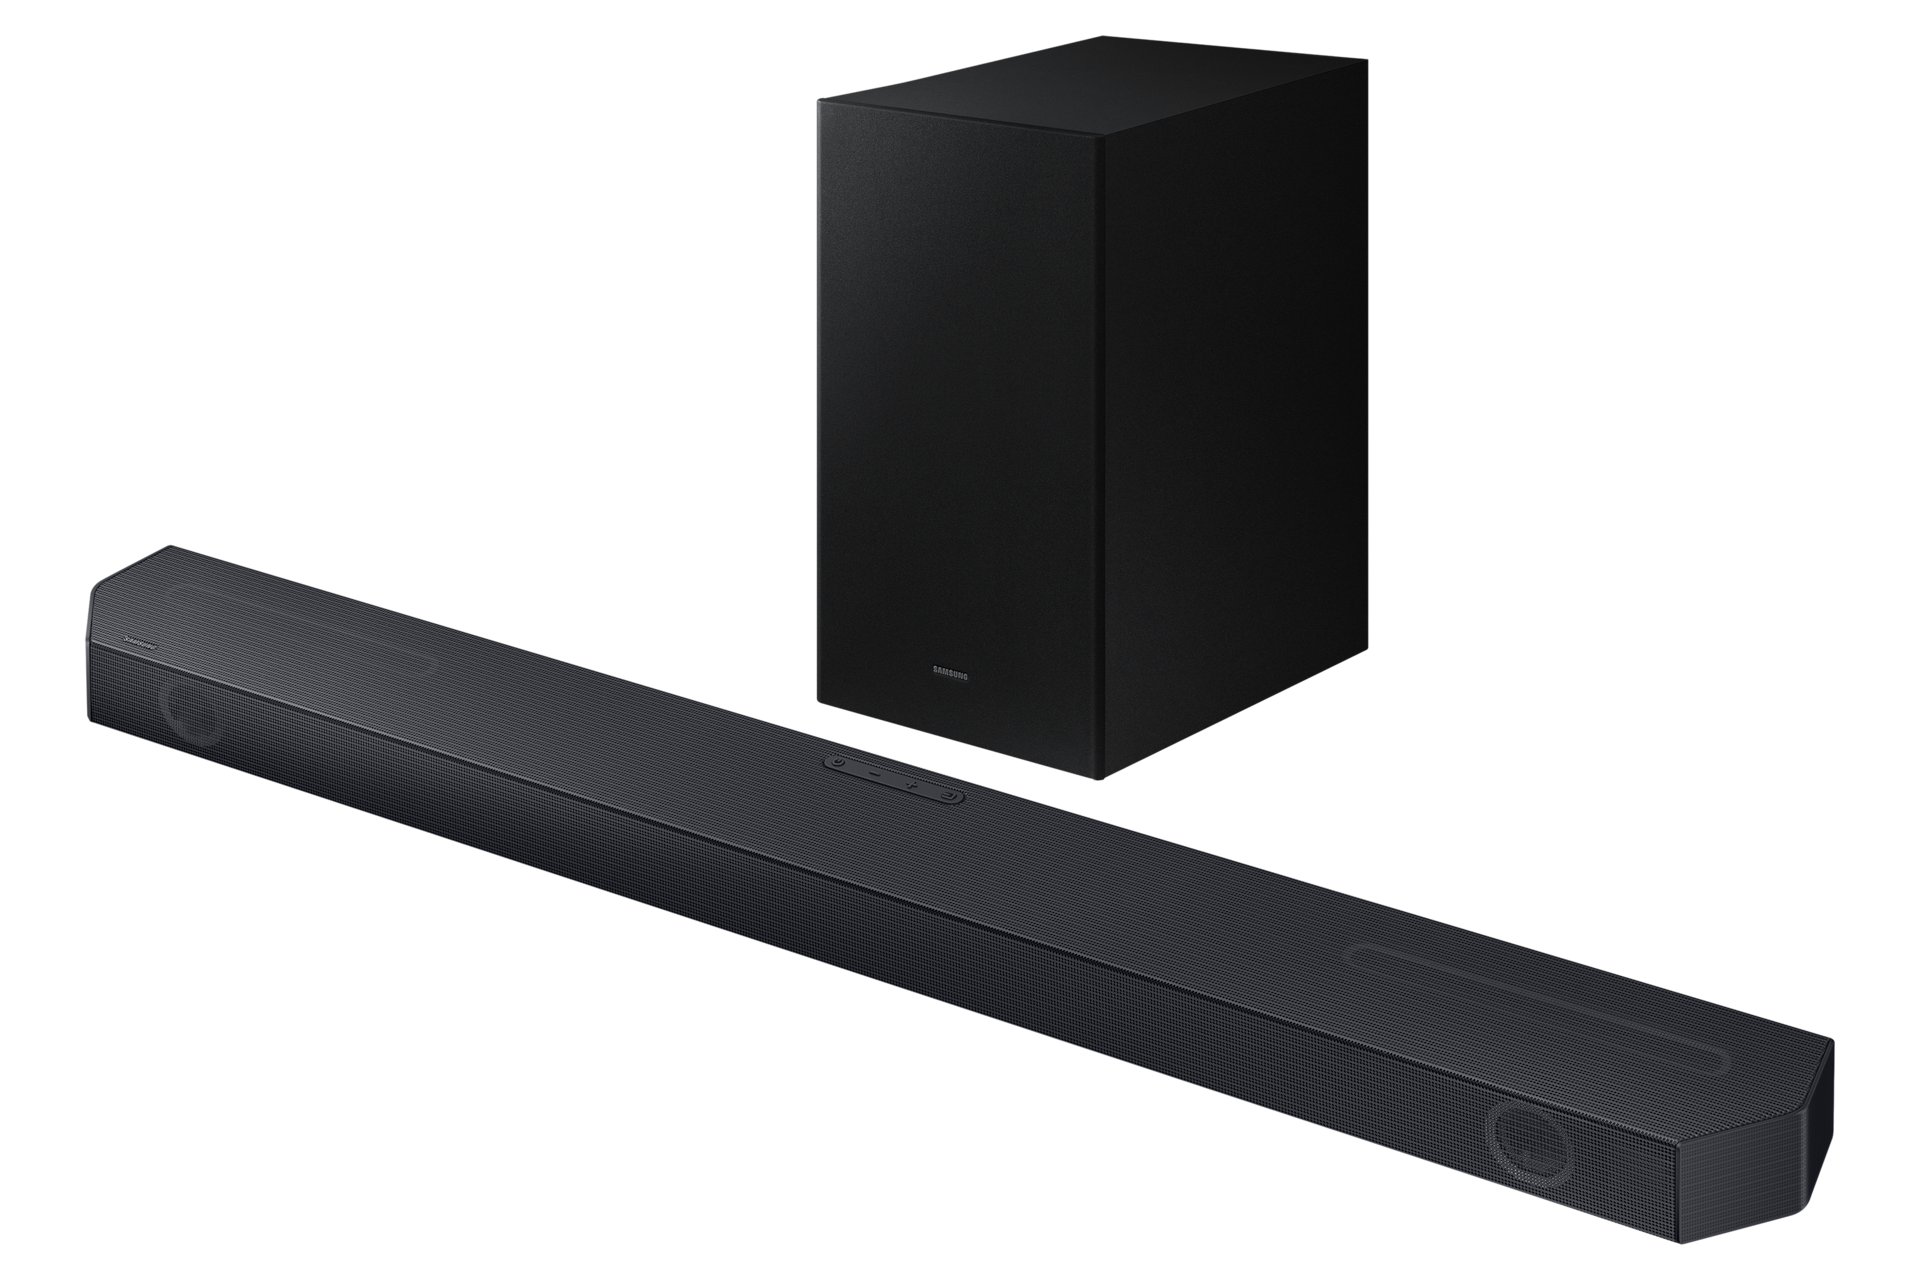 Latest Samsung Q Series Soundbar with Subwoofer (HW-Q600C/XM) - set-r-perspective view, Titan Black color at best price in Samsung Malaysia